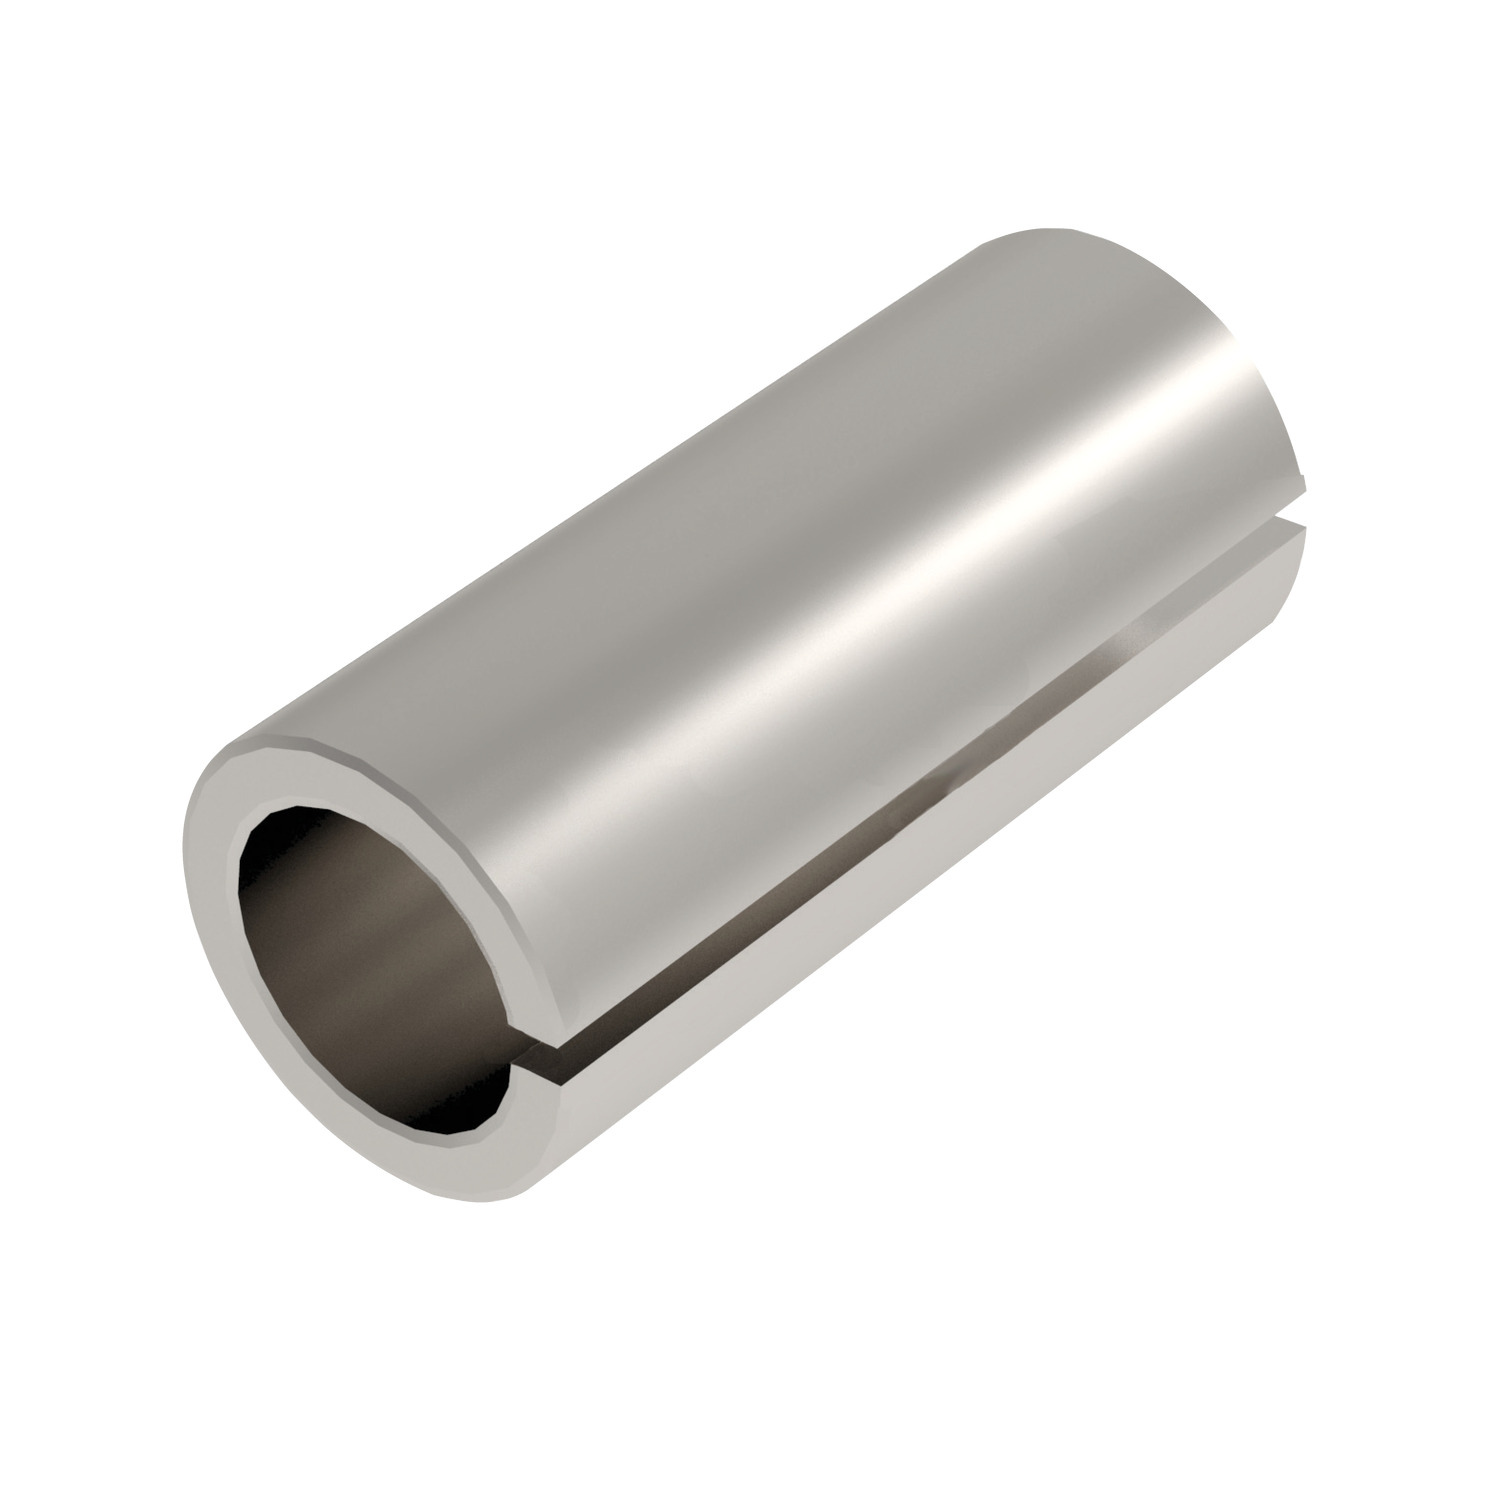 Product P1335, Clearance Spacers - Steel  / 